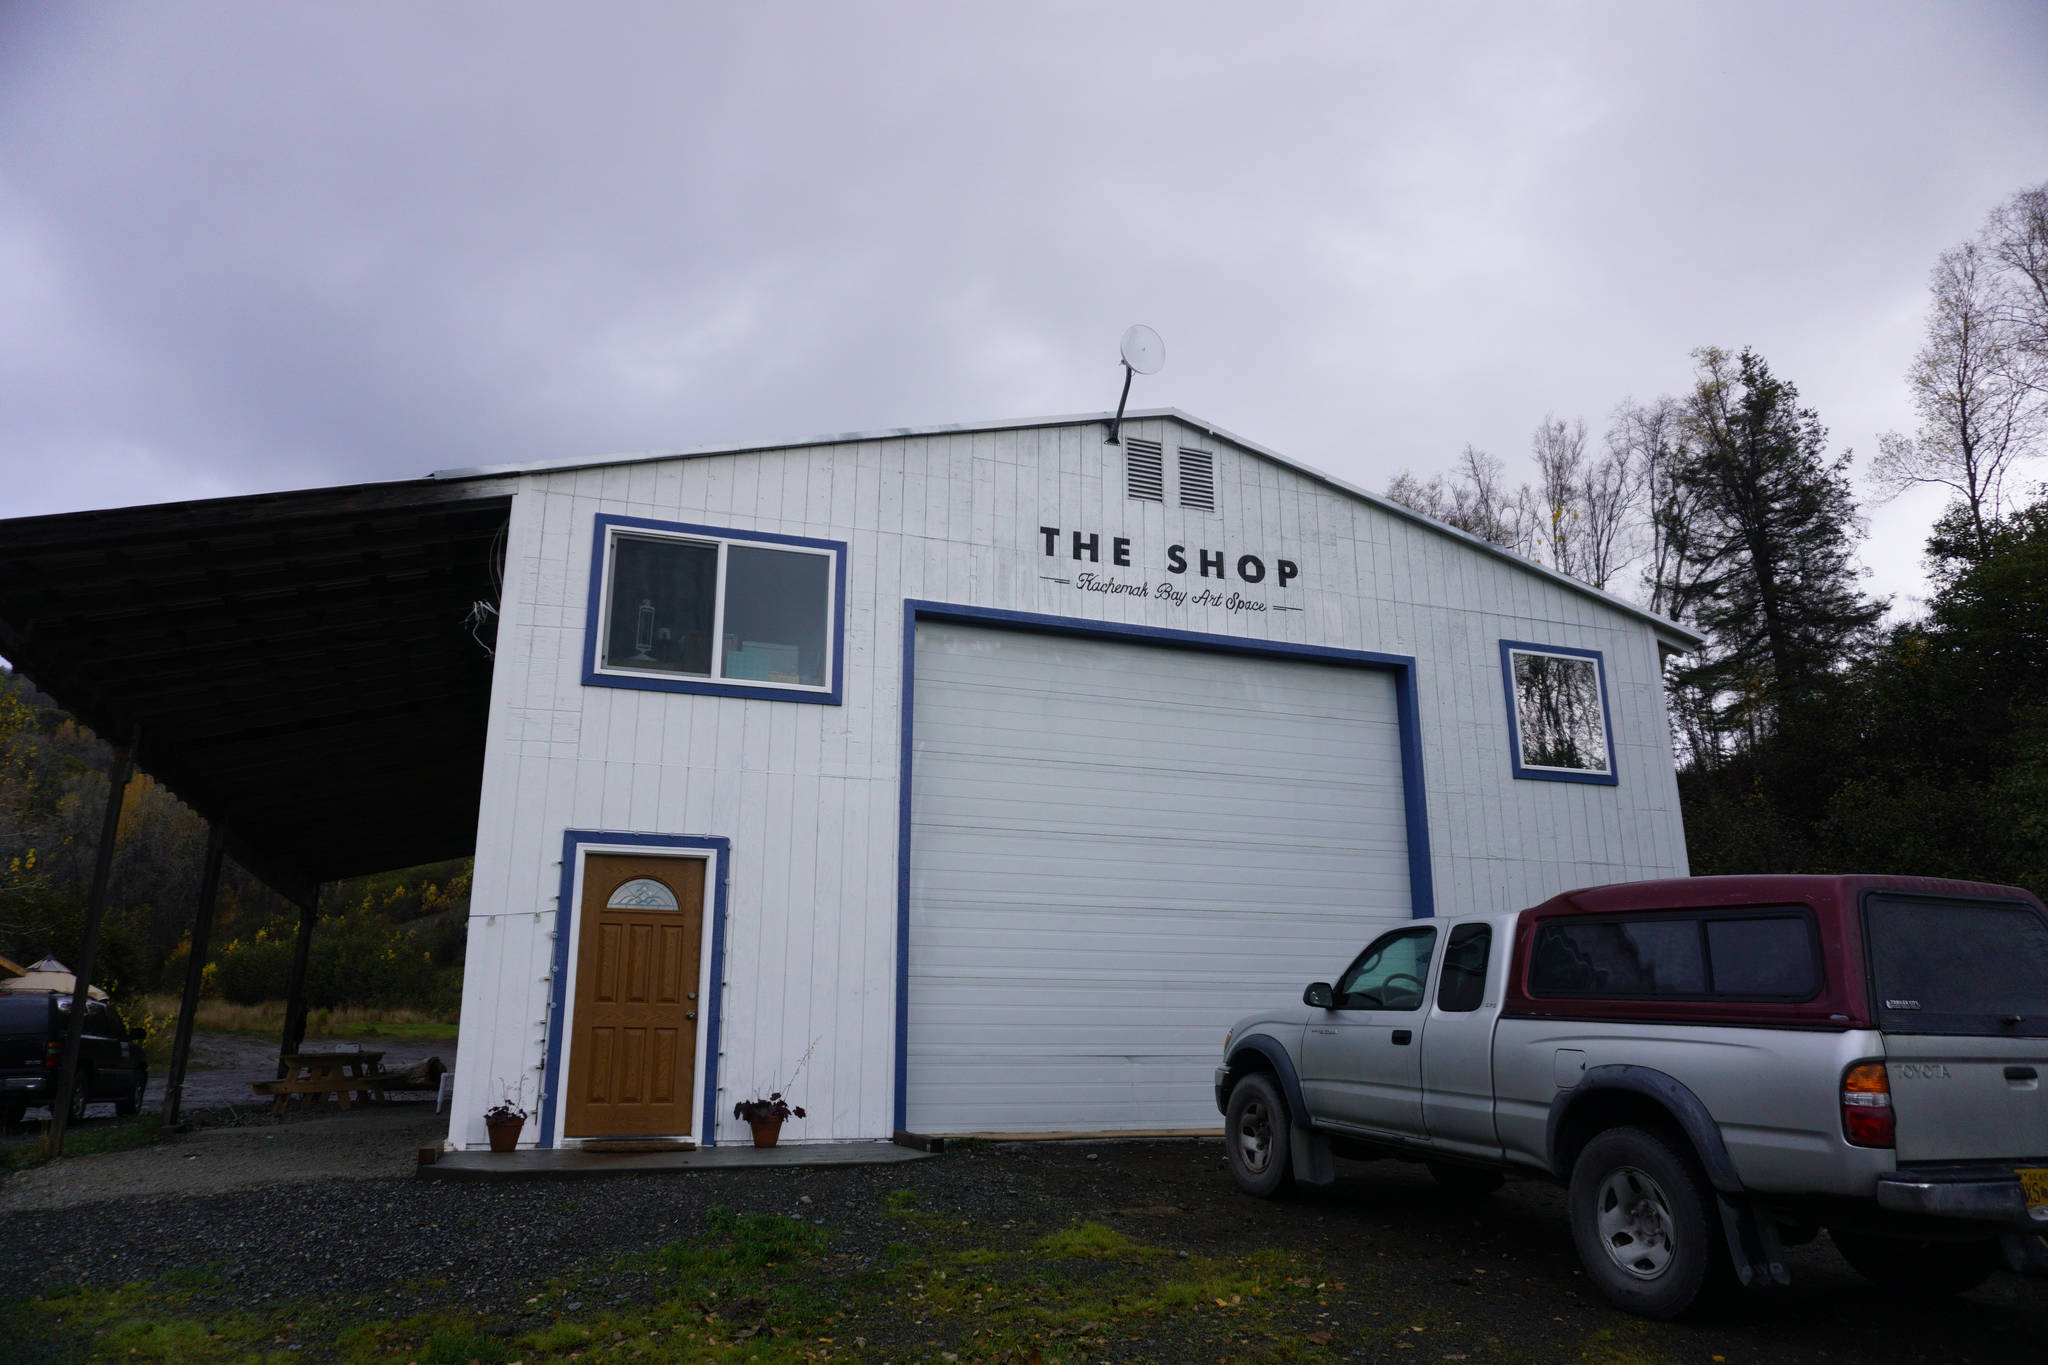 The Shop, a creative art space in Kachemak City, Alaska, started by artists Elissa and David Pettibone, is shown here on Tuesday, Oct. 16, 2018. (Photo by Michael Armstrong/Homer News)